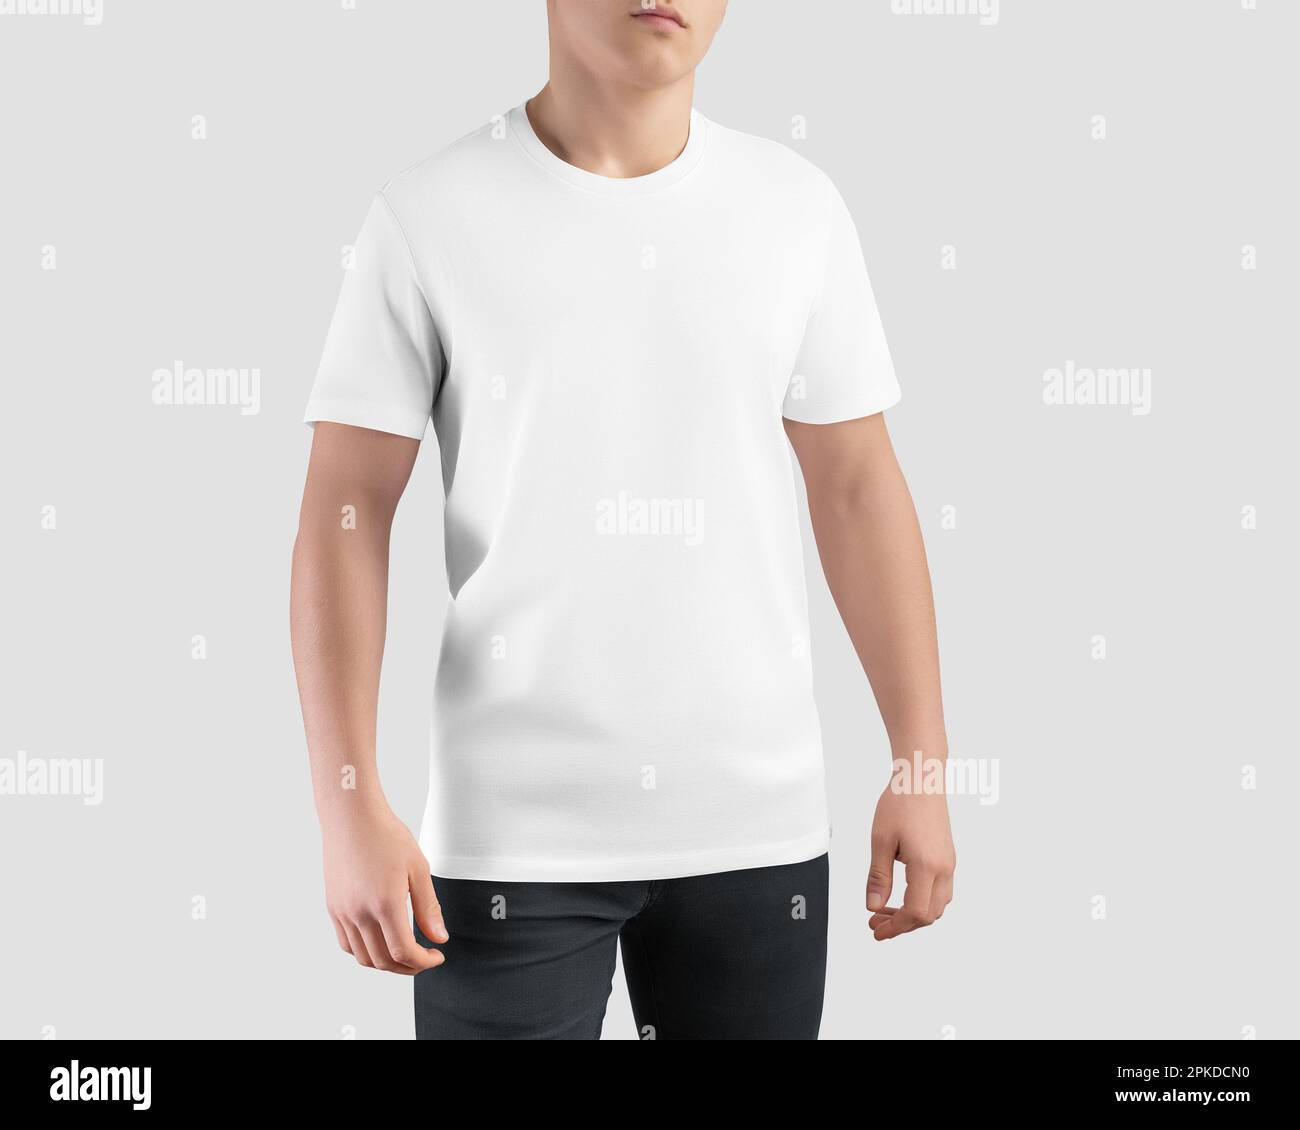 Mockup of a white shirt on a guy in dark jeans, front view, men's t-shirt, for commerce, design, branding, print. Template of casual apparel, product Stock Photo